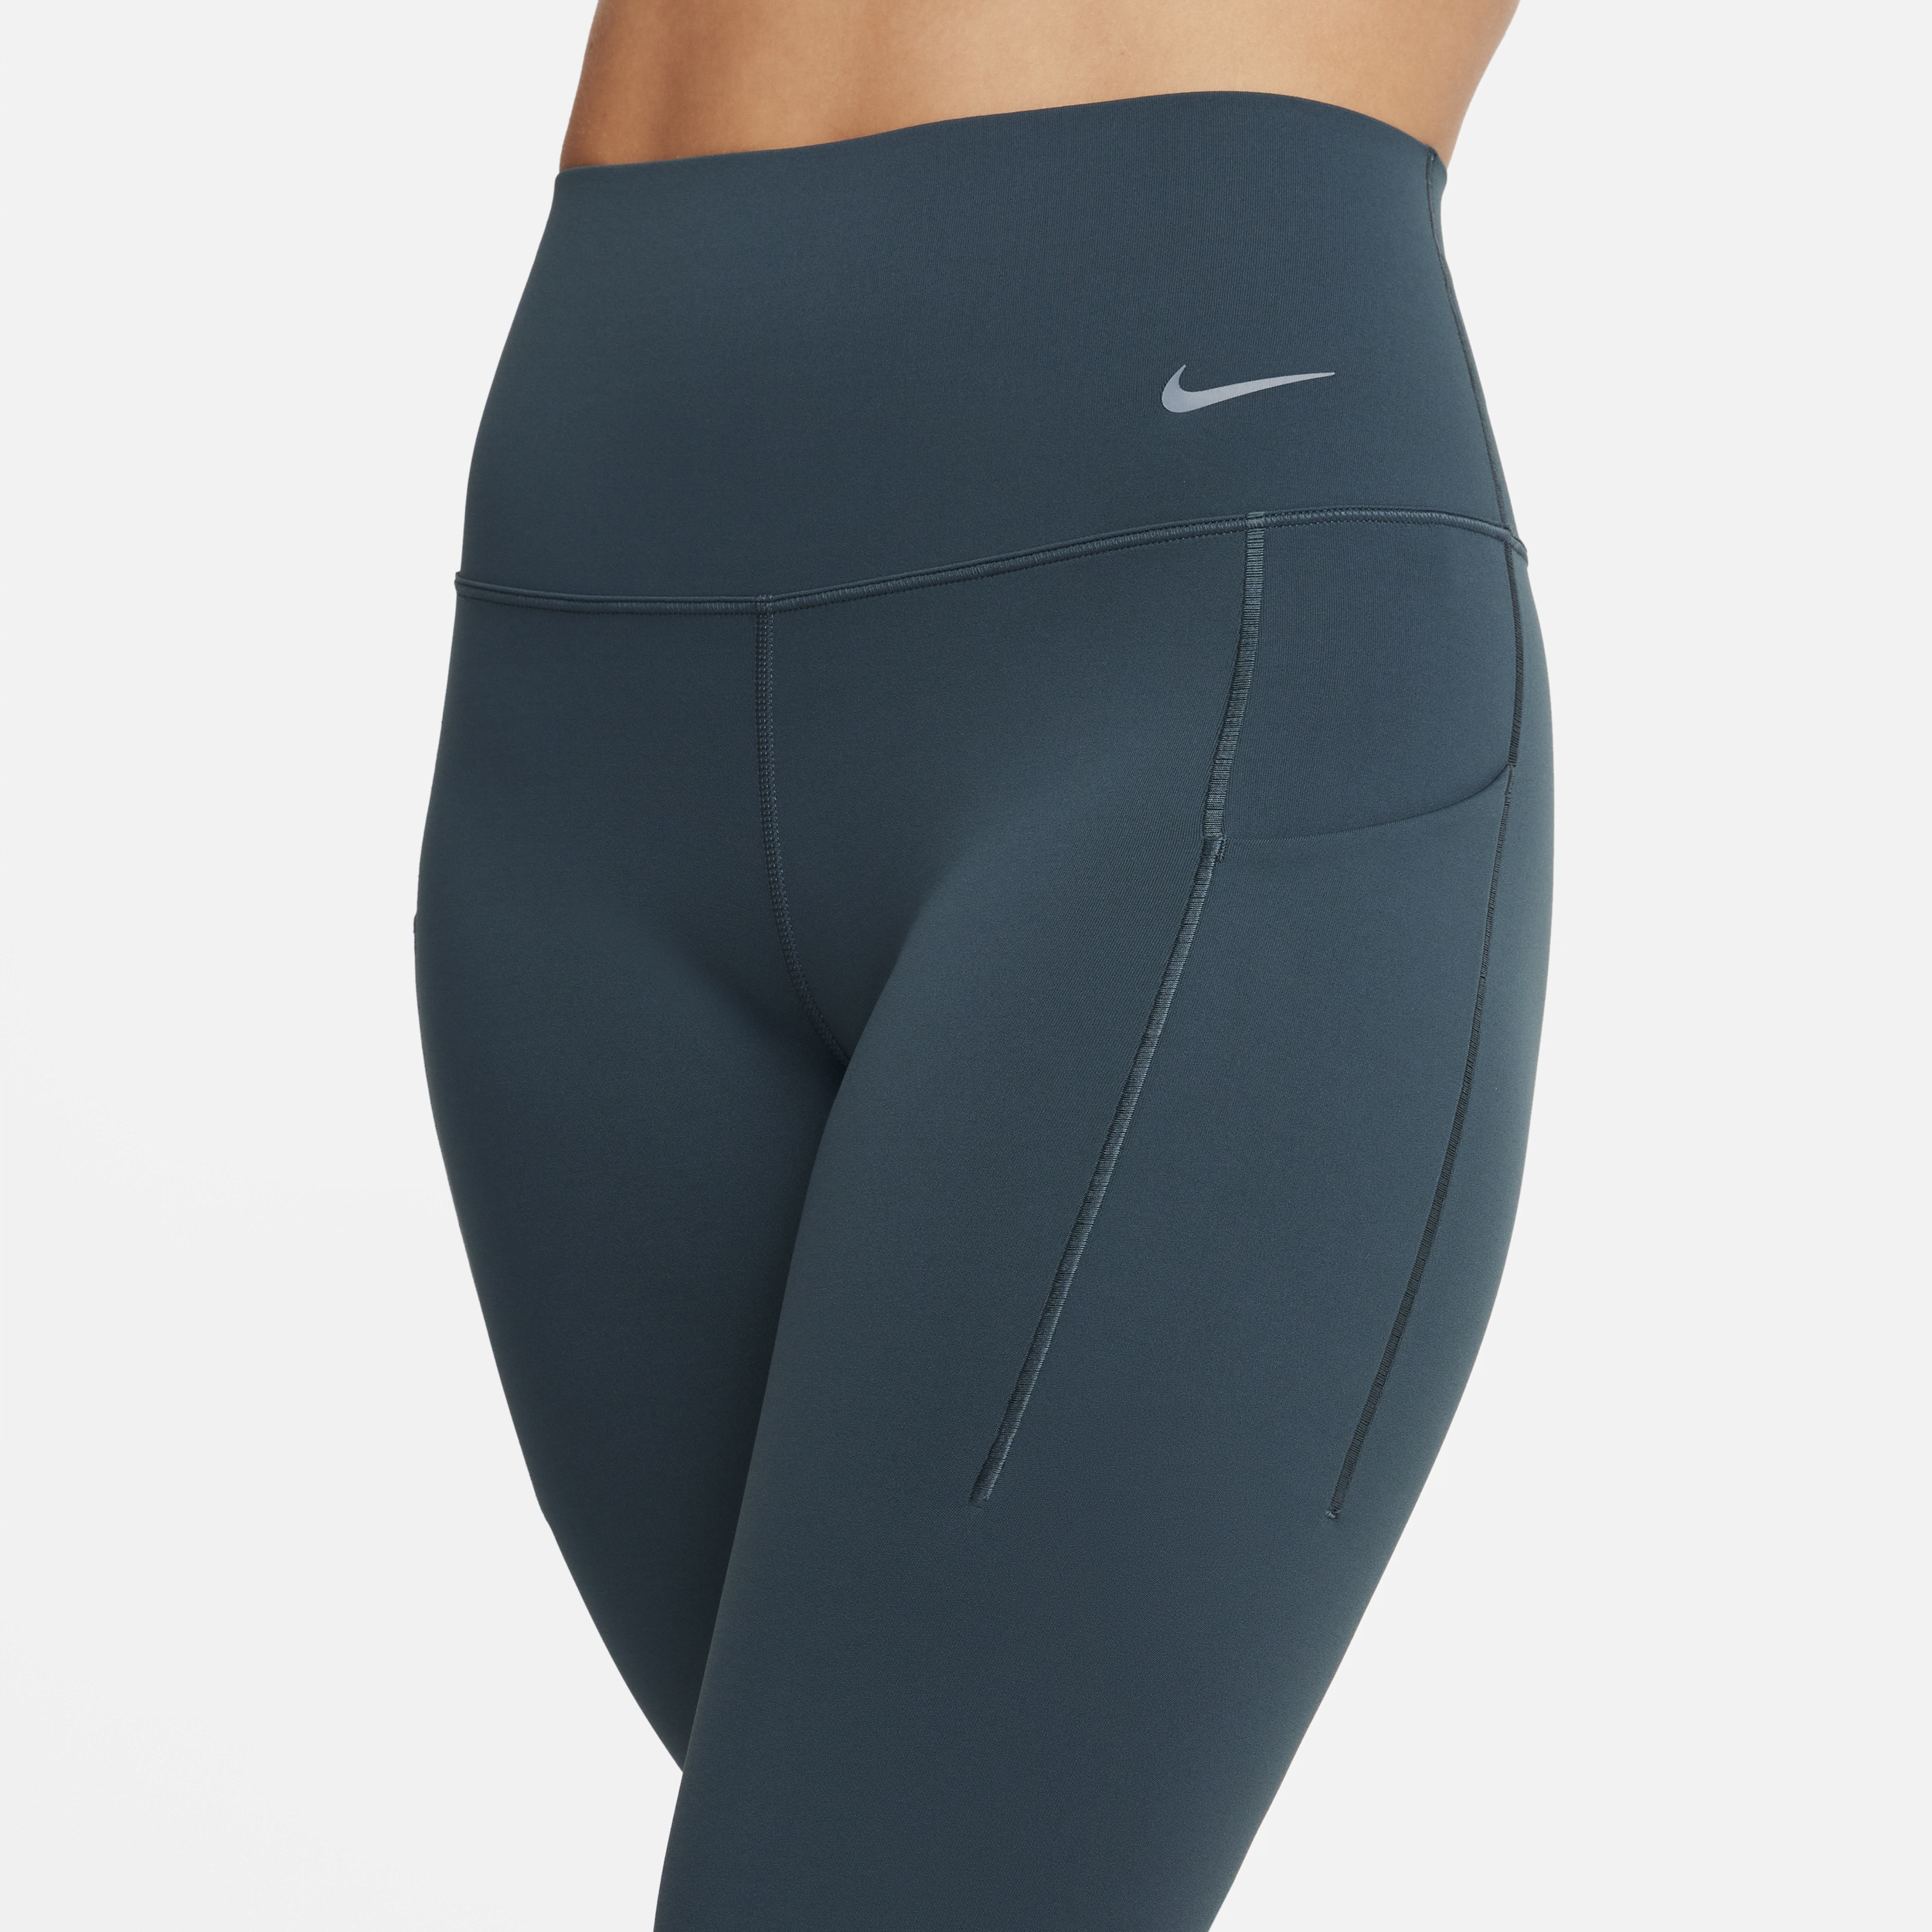 Nike Women's Universa Medium-Support High-Waisted 7/8 Leggings with Pockets - 4